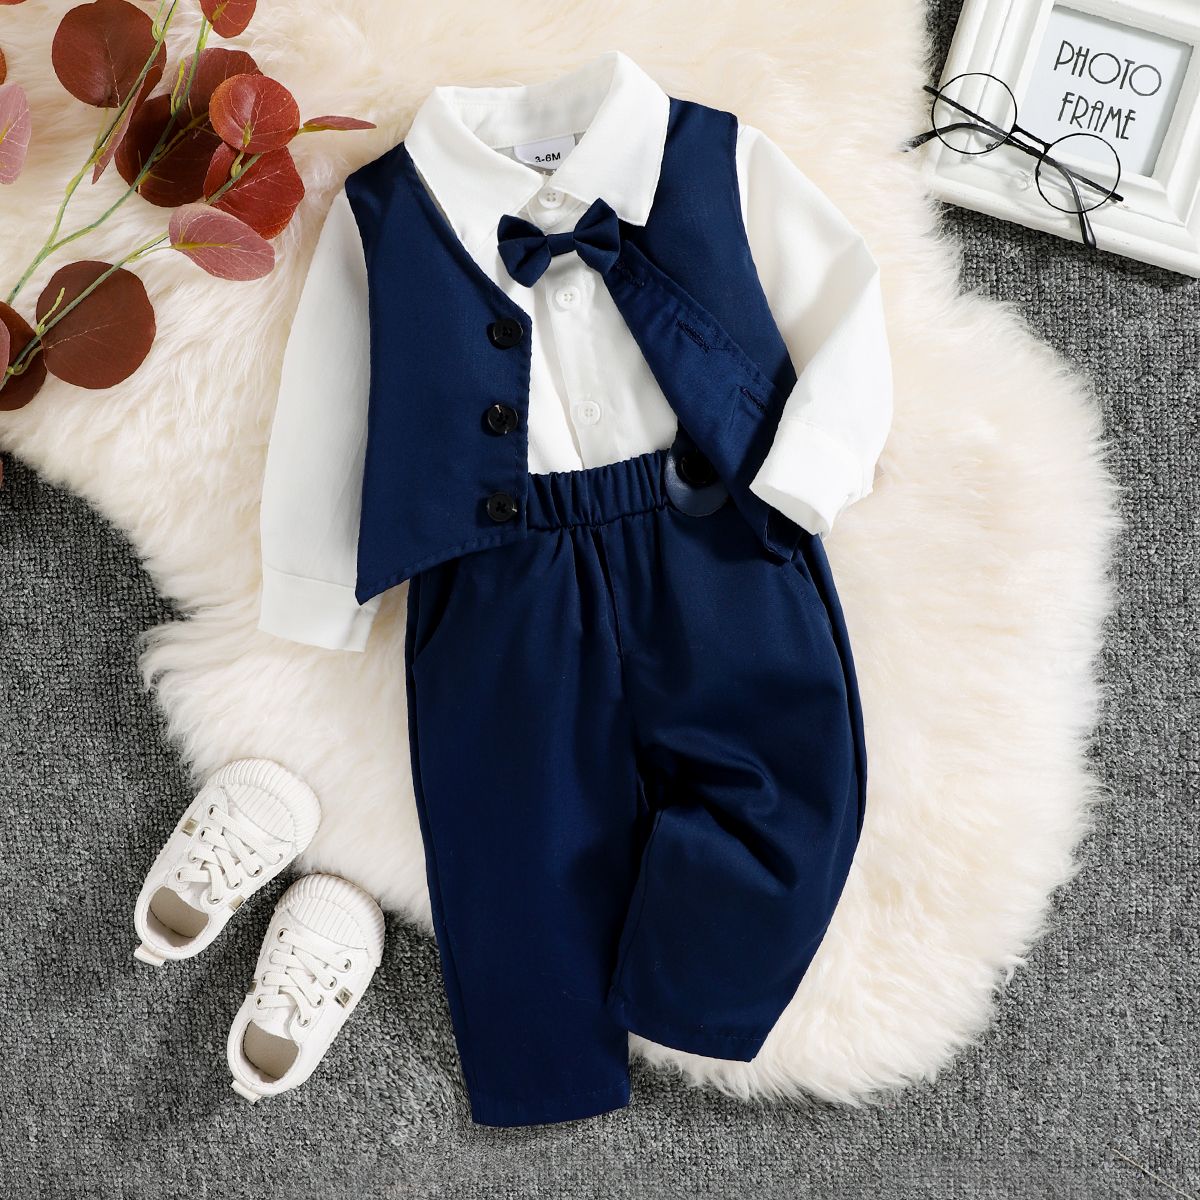 3pcs Baby Boy Party Outfits Gentleman Bow Tie Long-sleeve Shirt and Solid Waistcoat with Suspender P